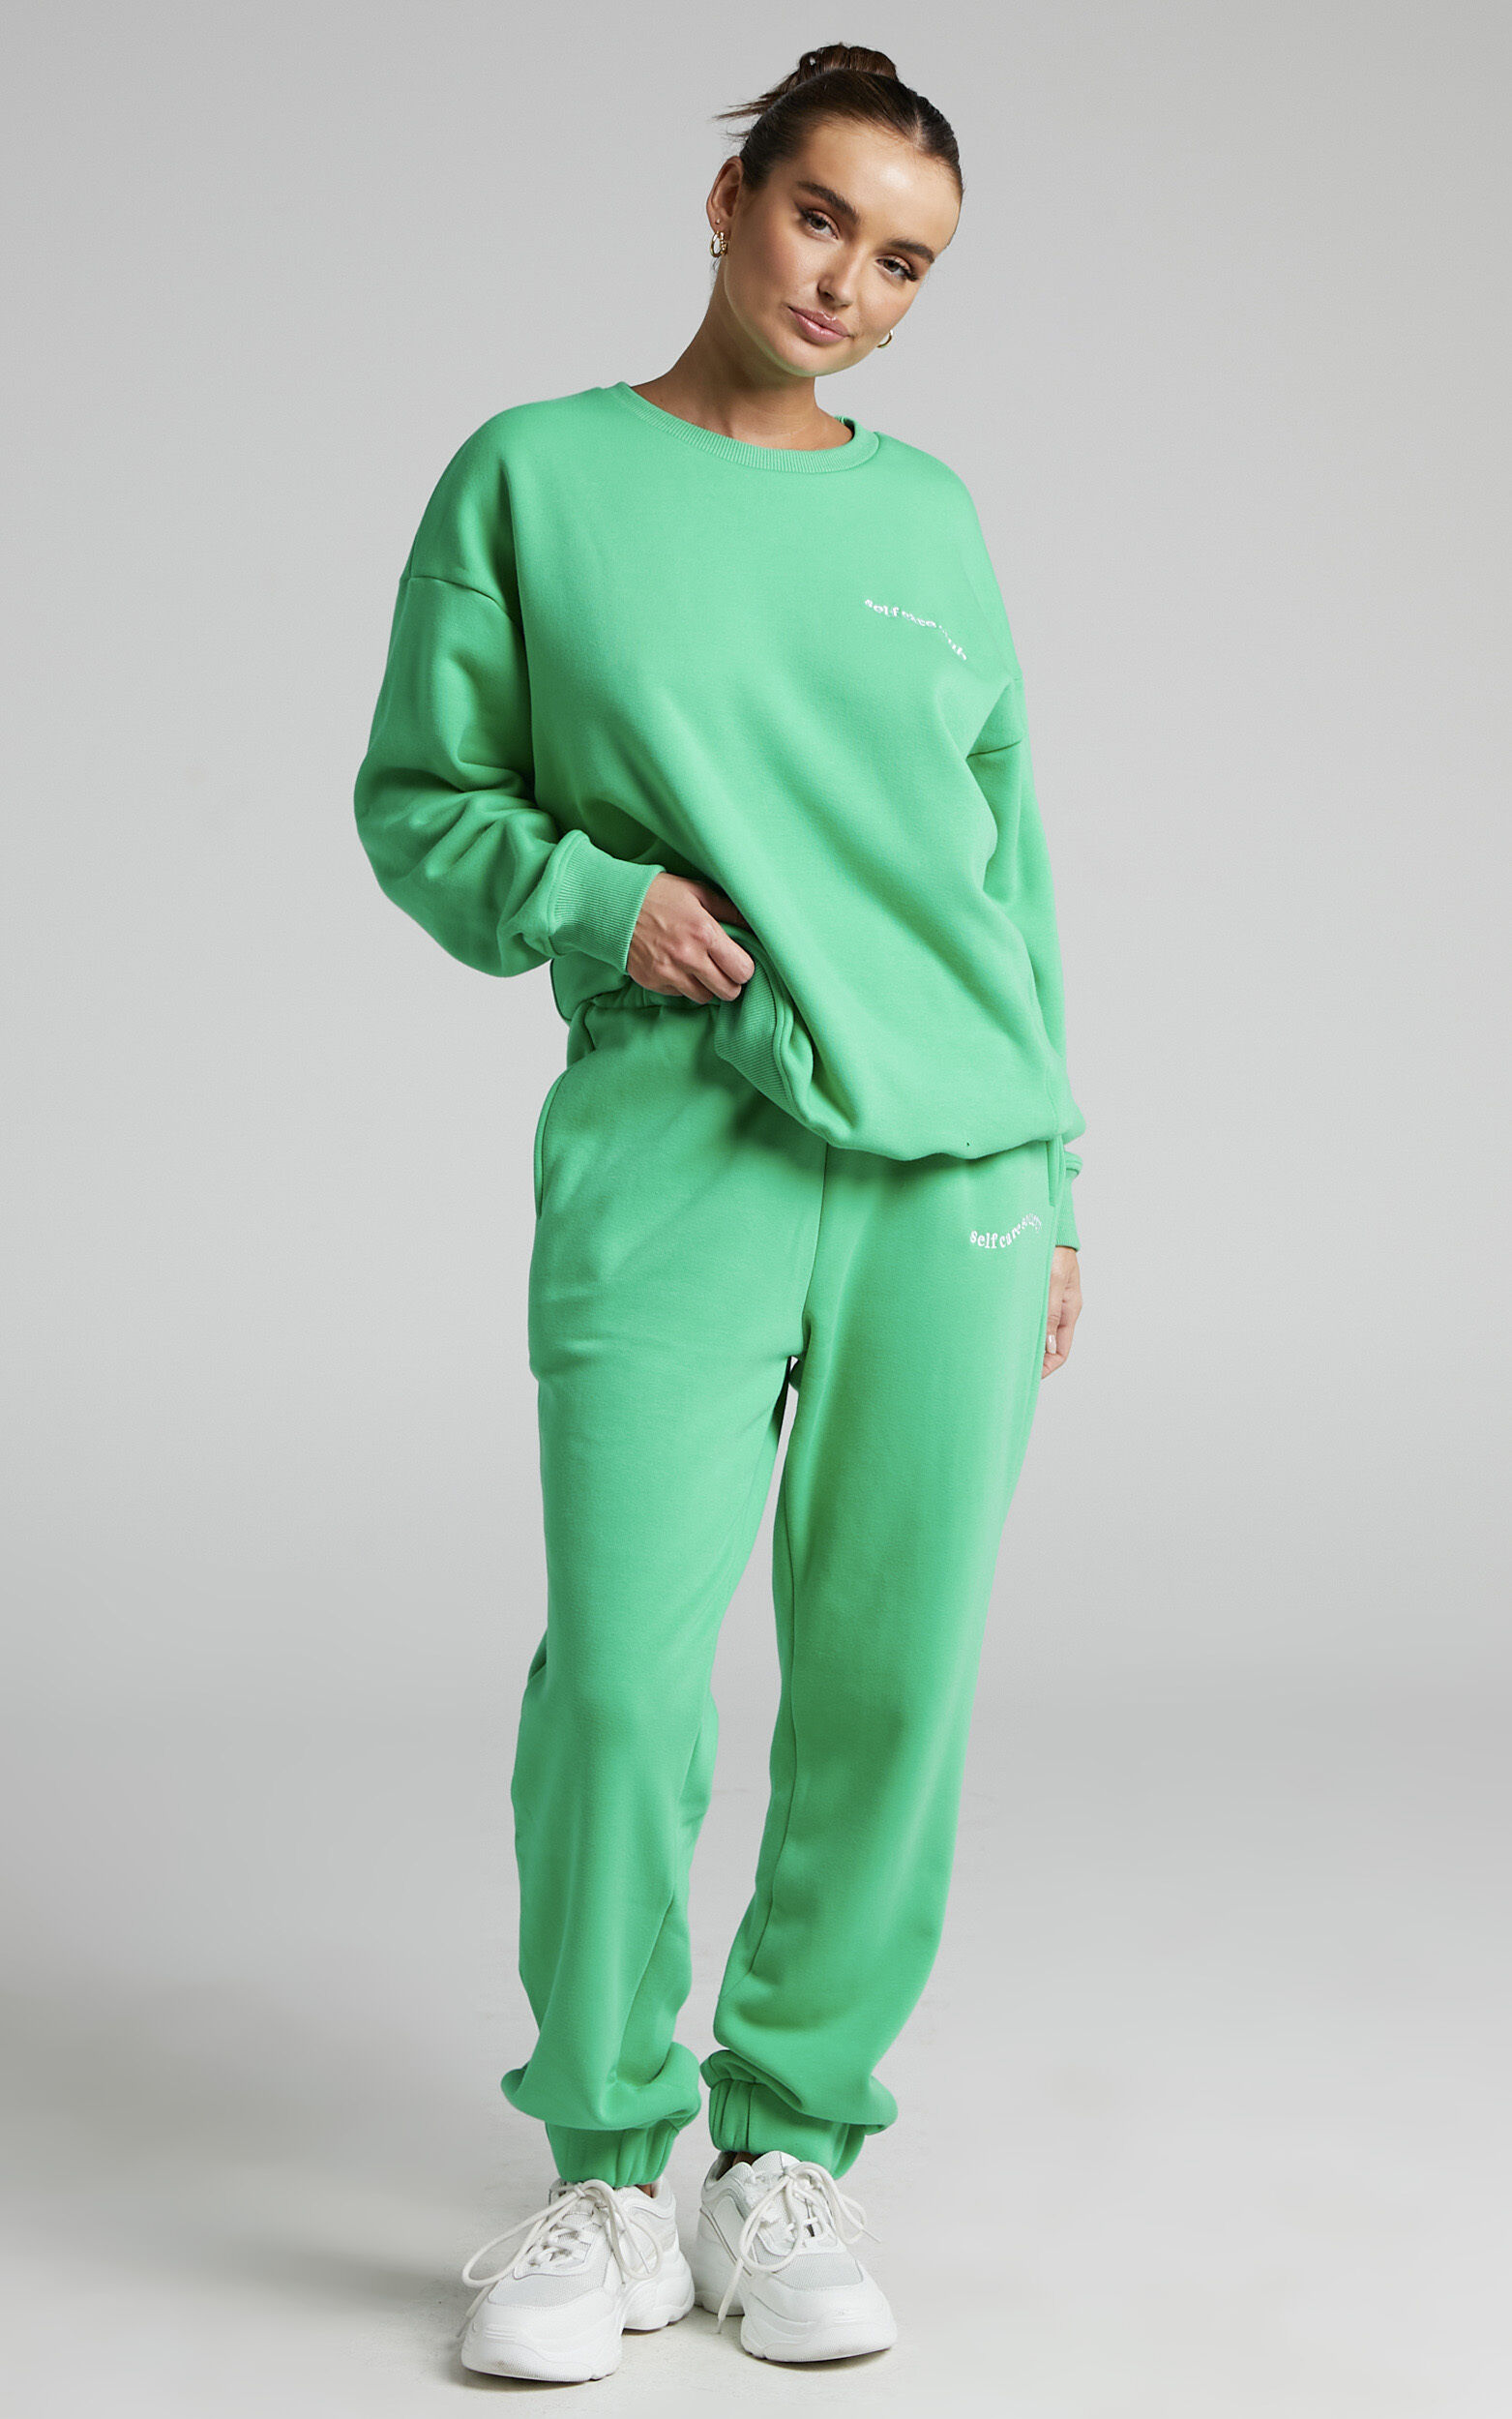 Sunday Society Club - Mid Waisted Maddie Sweatpants in Apple Green - 04, GRN5